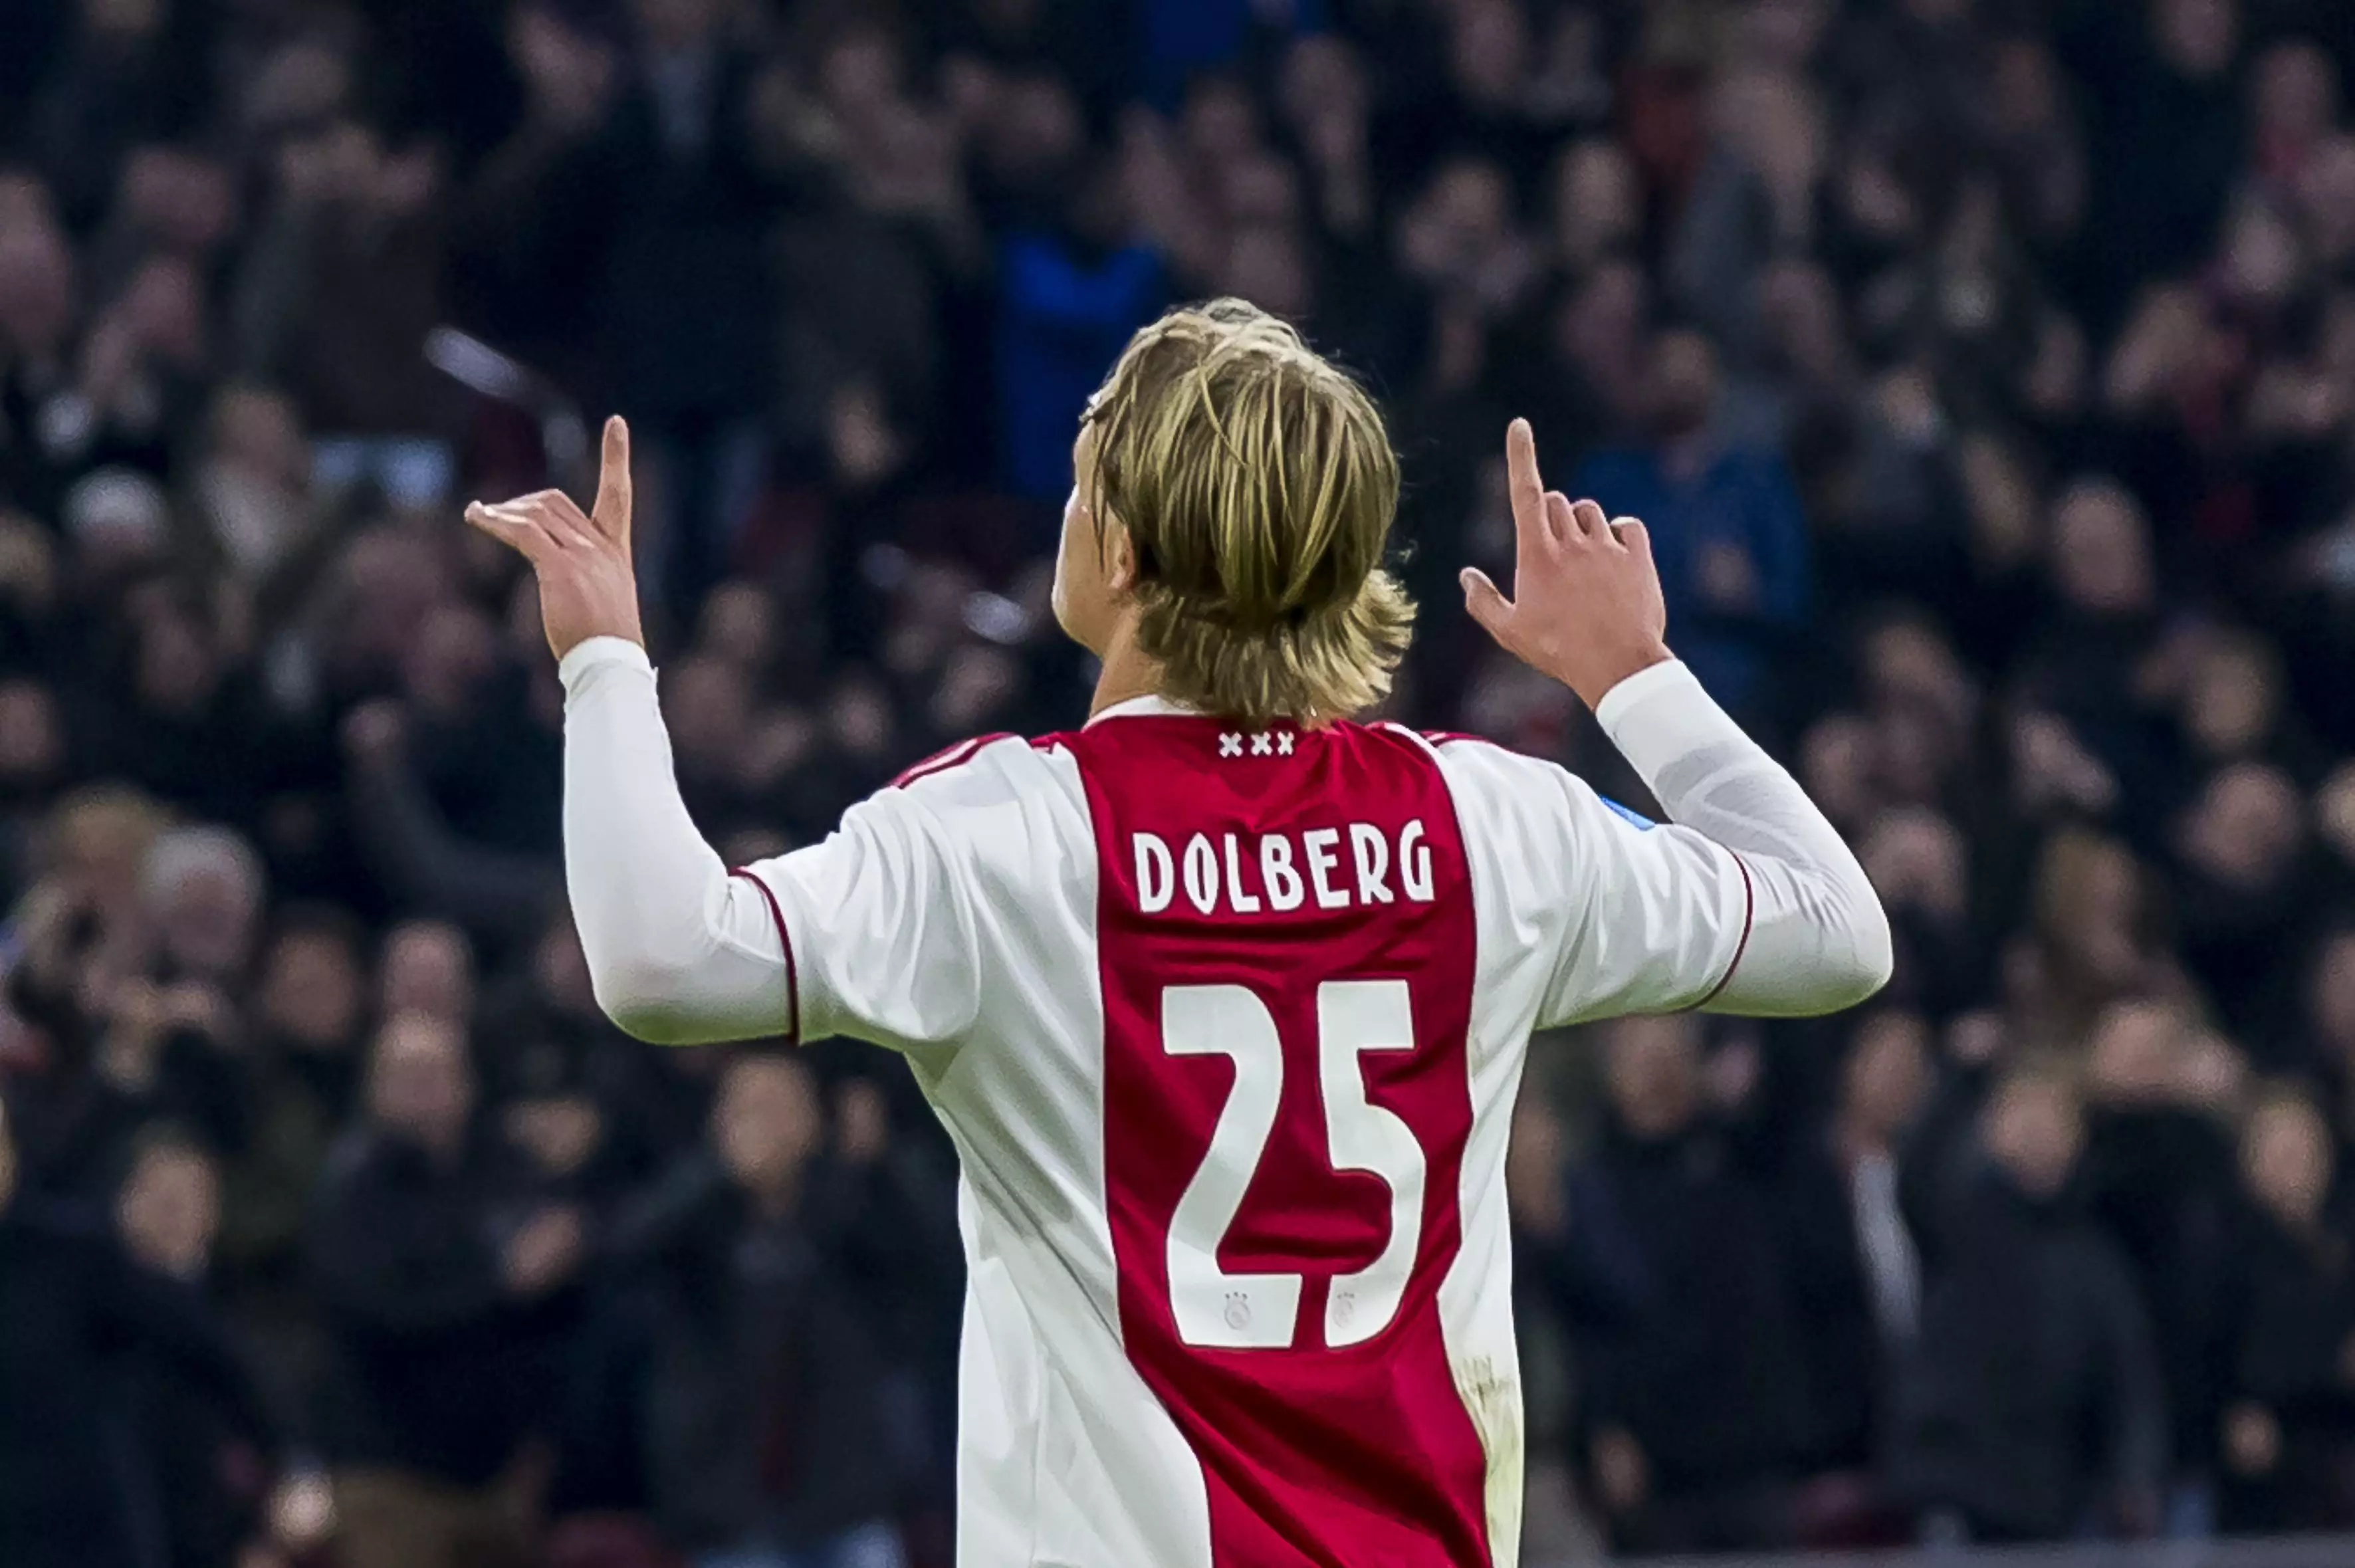 Dolberg has impressed in the last two seasons for Ajax. Image: PA Images